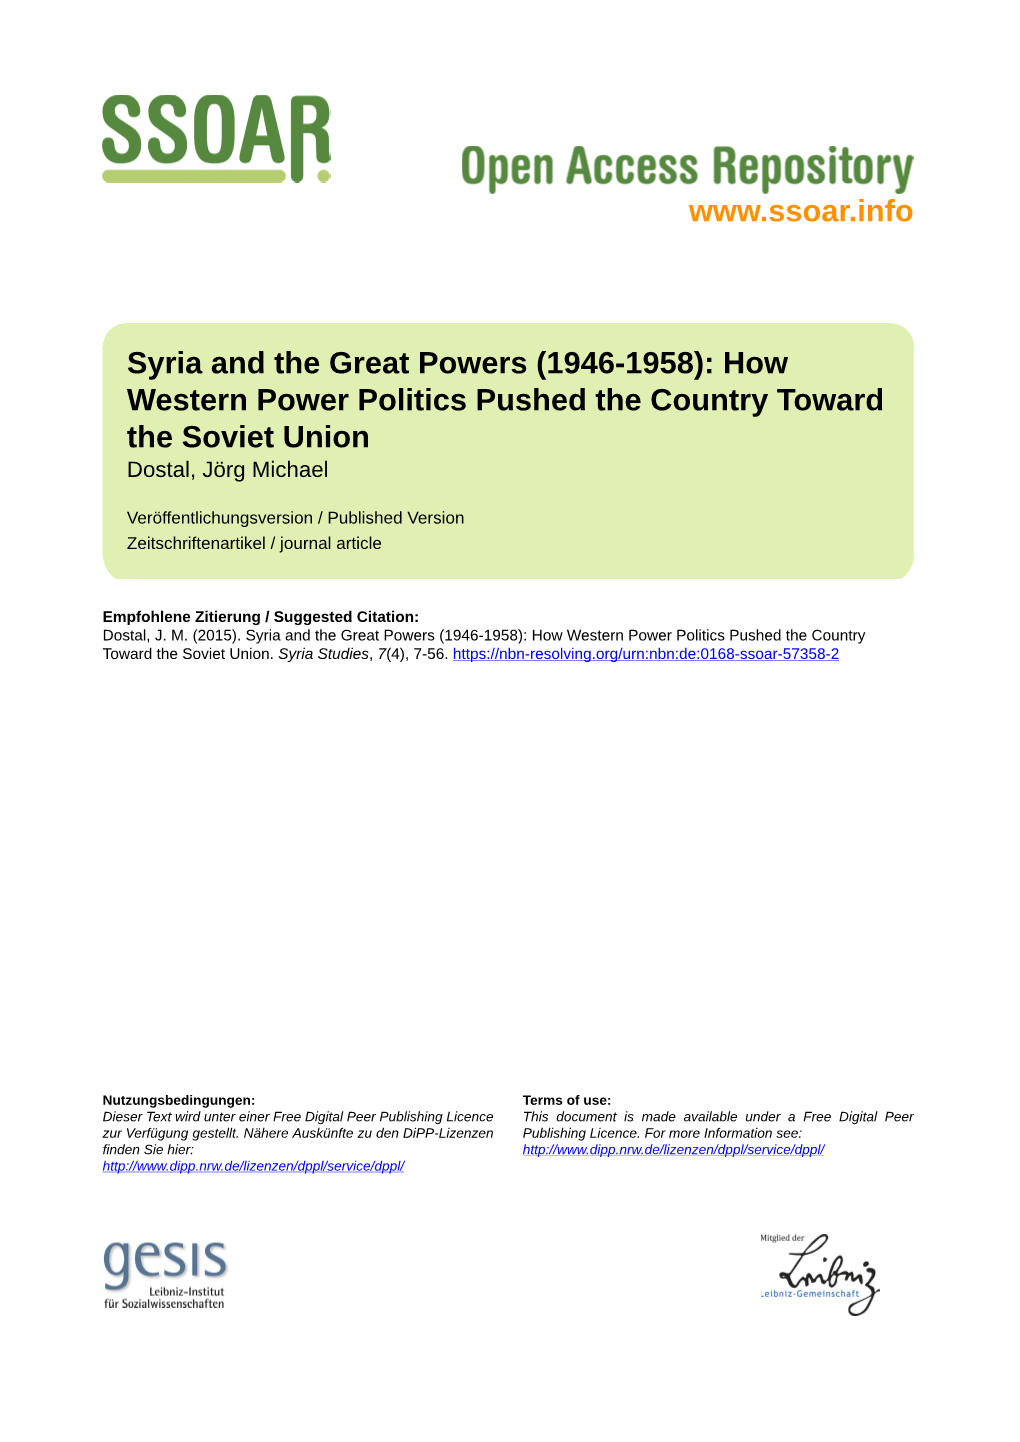 Syria and the Great Powers (1946-1958): How Western Power Politics Pushed the Country Toward the Soviet Union Dostal, Jörg Michael